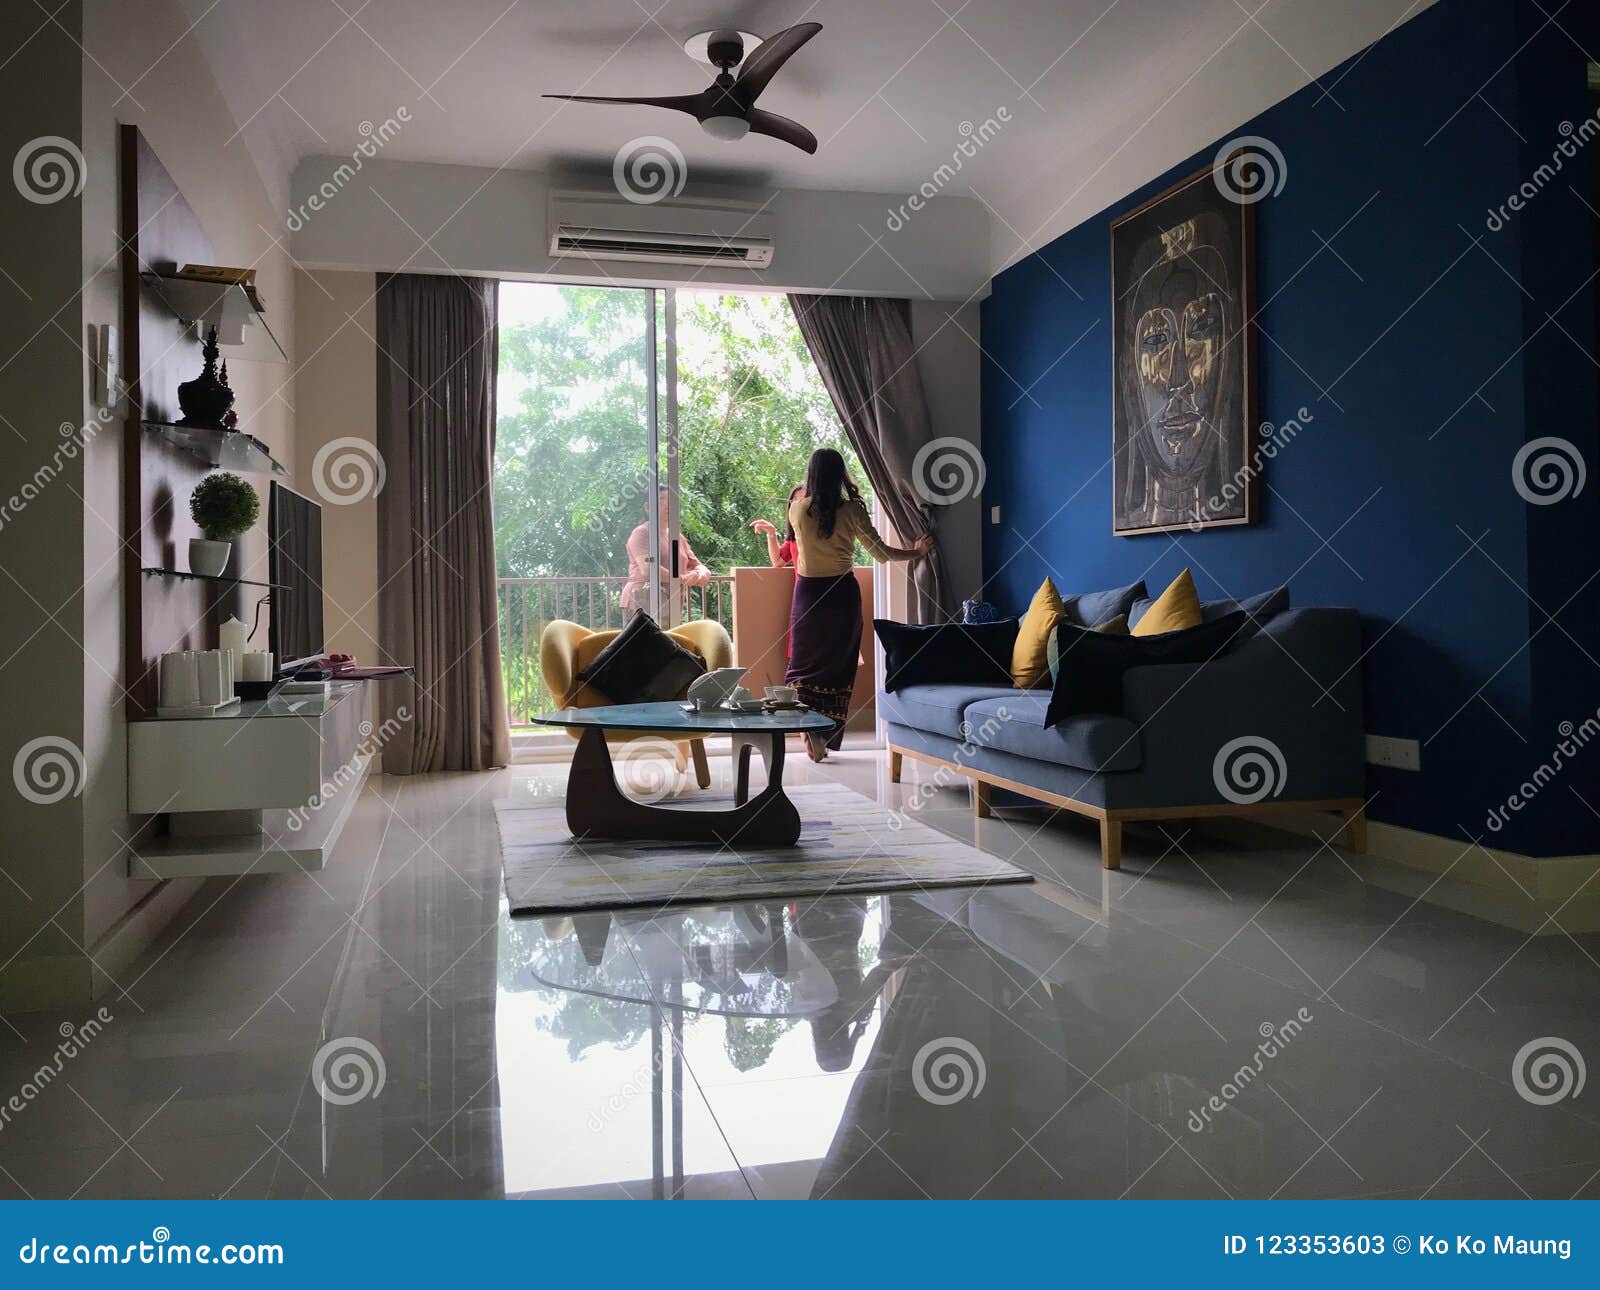  Home  Decorating  Architecture Editorial Stock Photo Image 